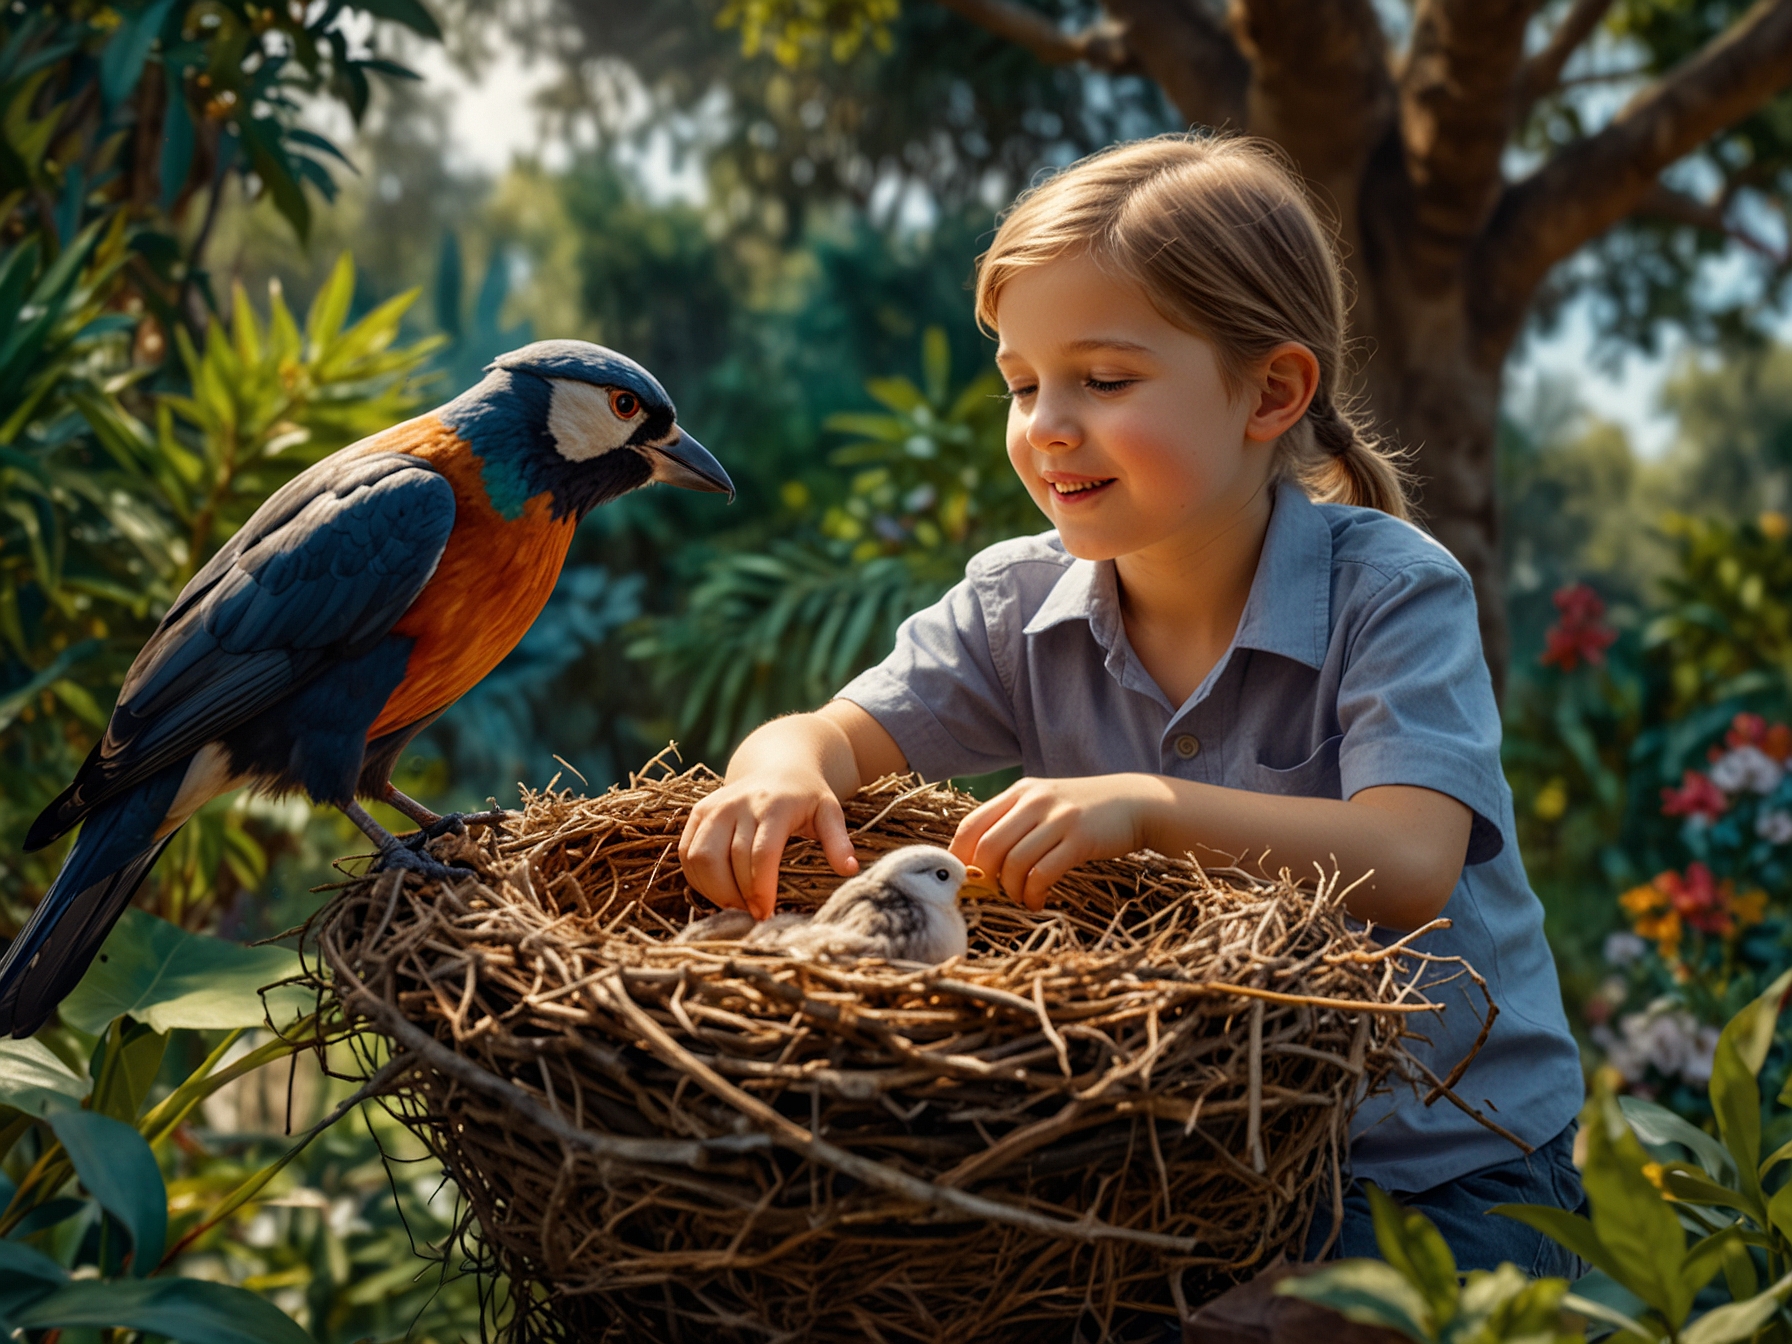 A beautifully illustrated scene of Tom and Emma discovering a nest of phoebe birds in their backyard, capturing their curiosity and the vibrant details of the natural setting.